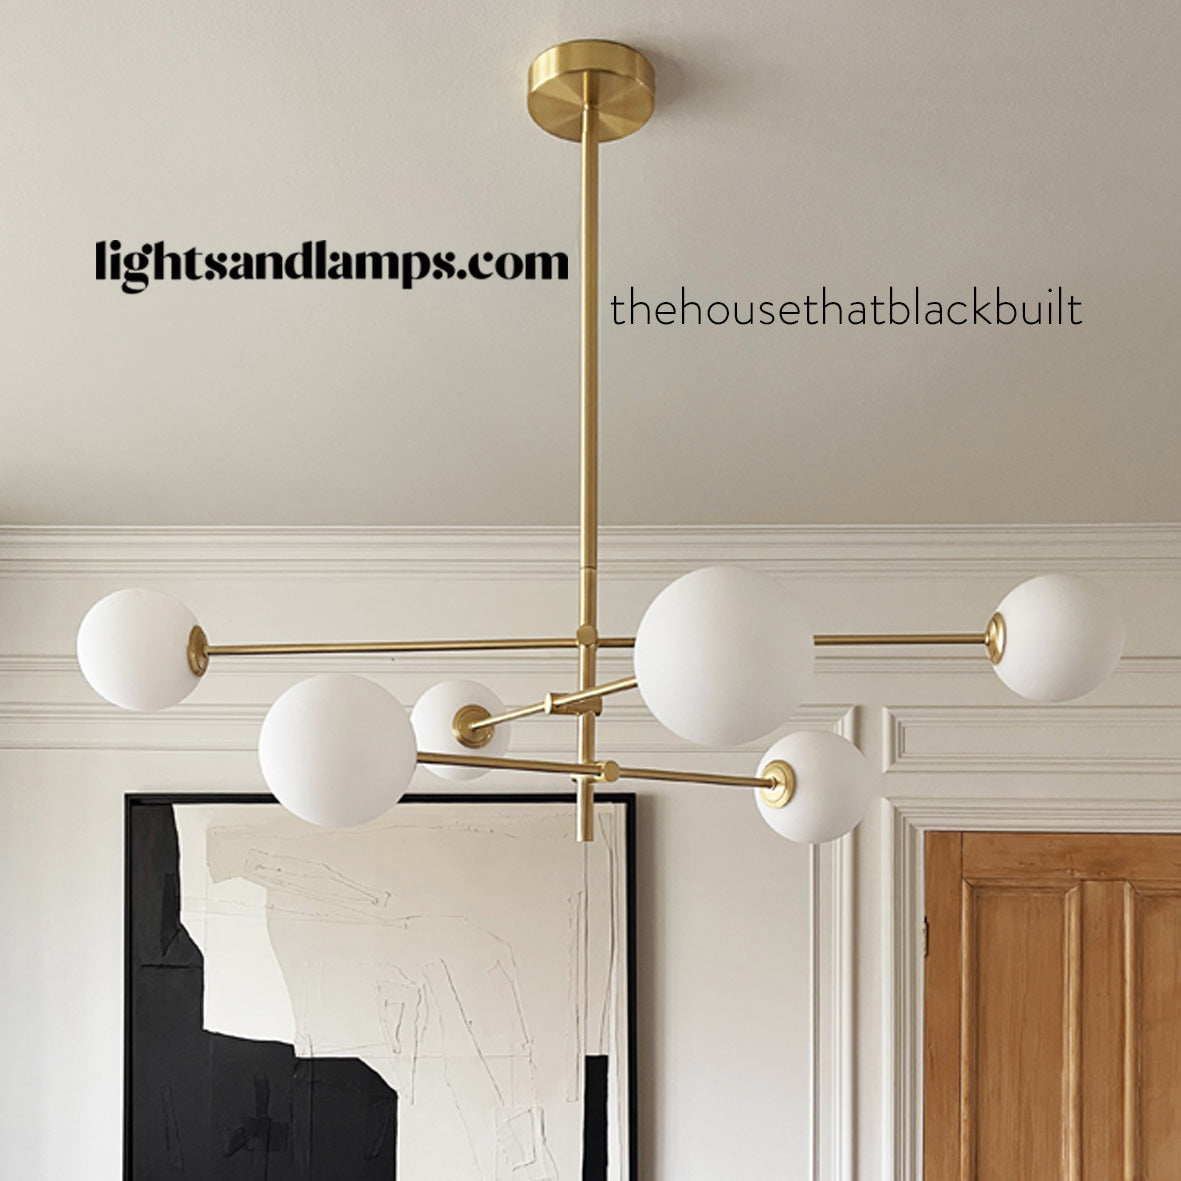 www.lightsandlamps.com. New online lighting retailer. Floor lamps, table lamps, ceiling and wall lights.